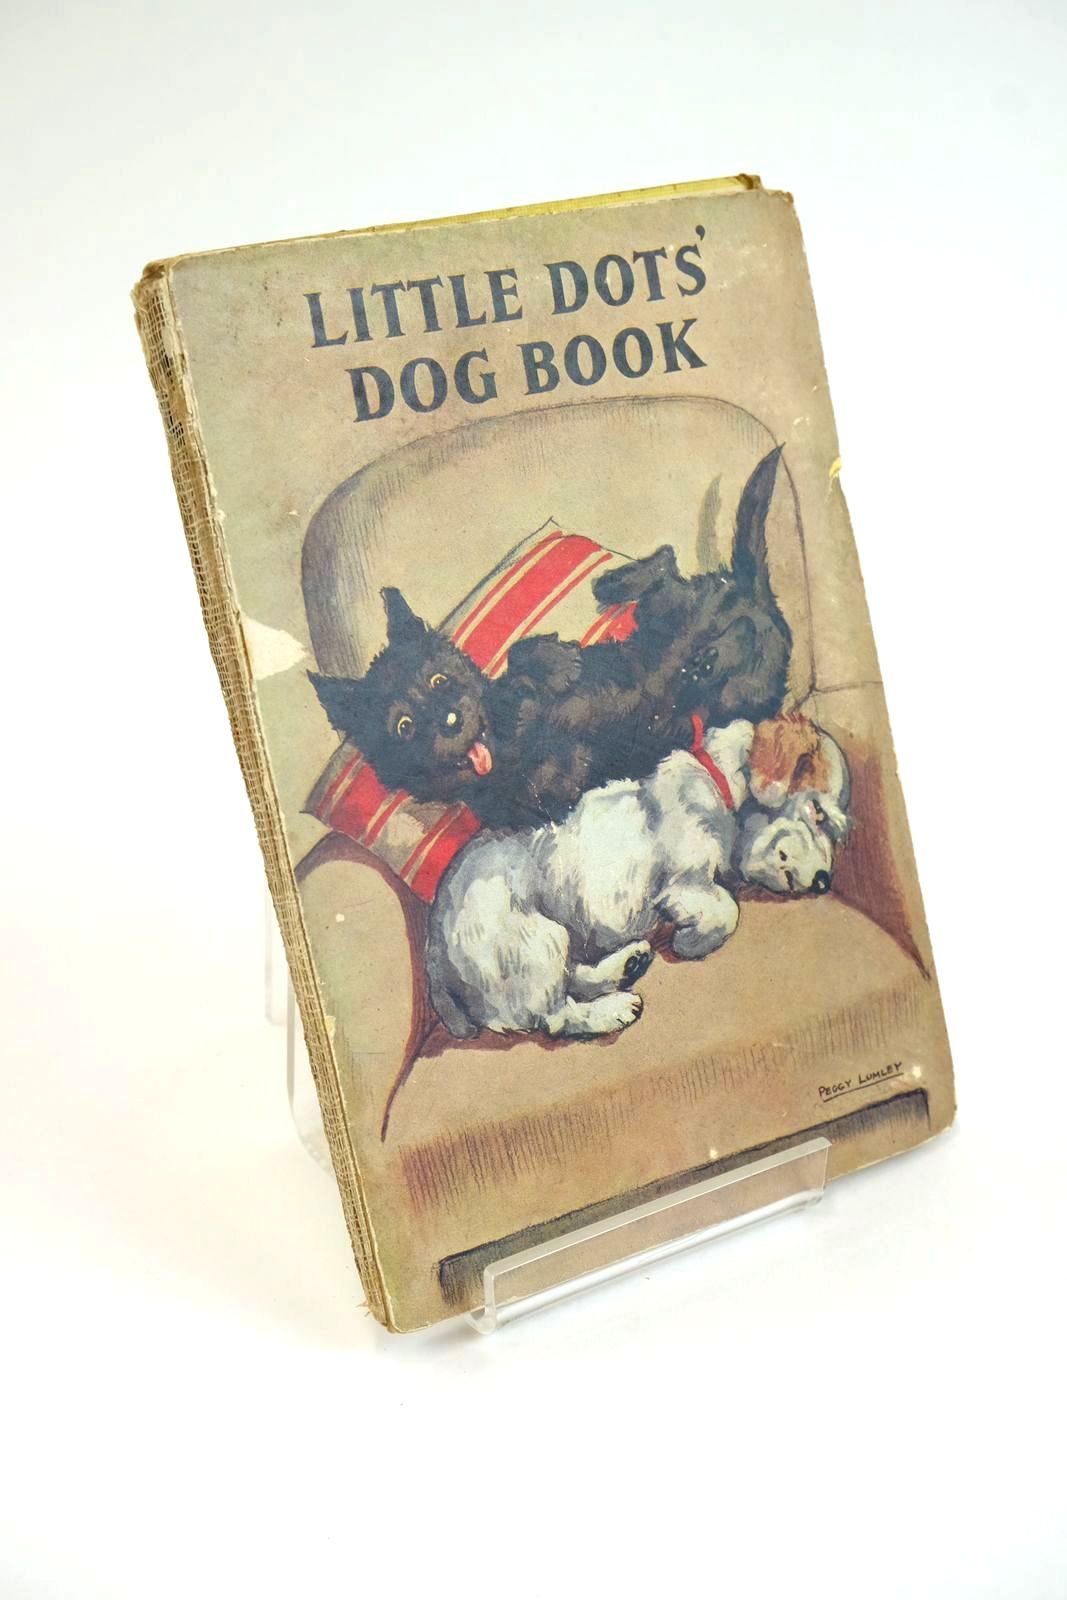 Photo of LITTLE DOTS' DOG BOOK written by Spratt, Gladys M. illustrated by Lumley, Peggy published by Lutterworth Press (STOCK CODE: 1328081)  for sale by Stella & Rose's Books